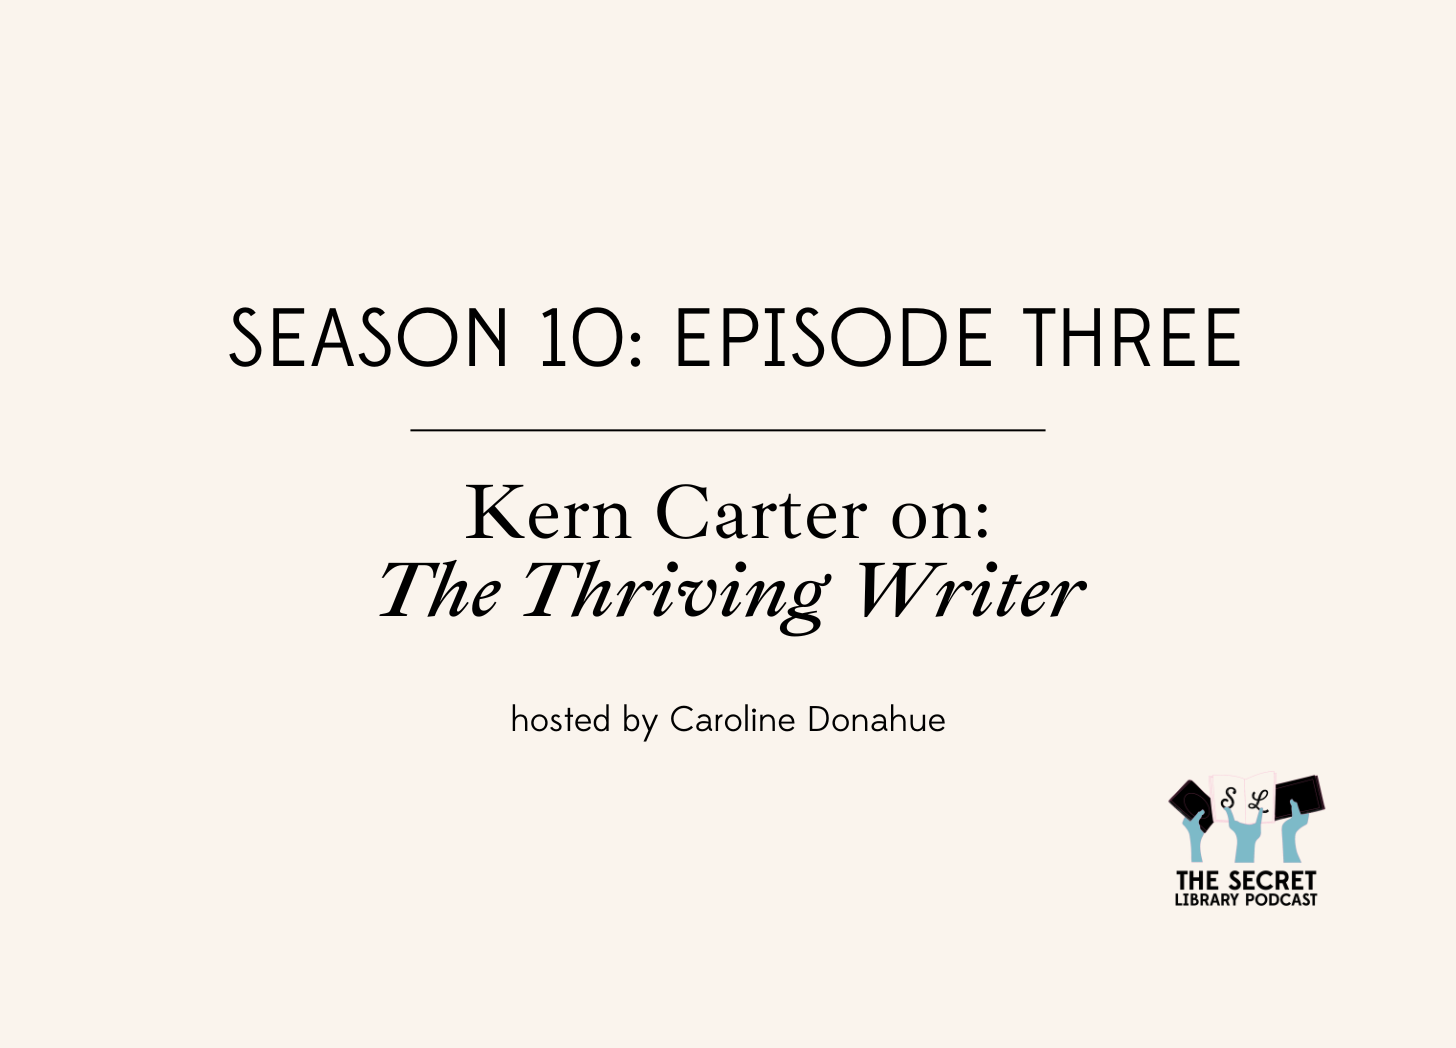 The Thriving Writer with Kern Carter